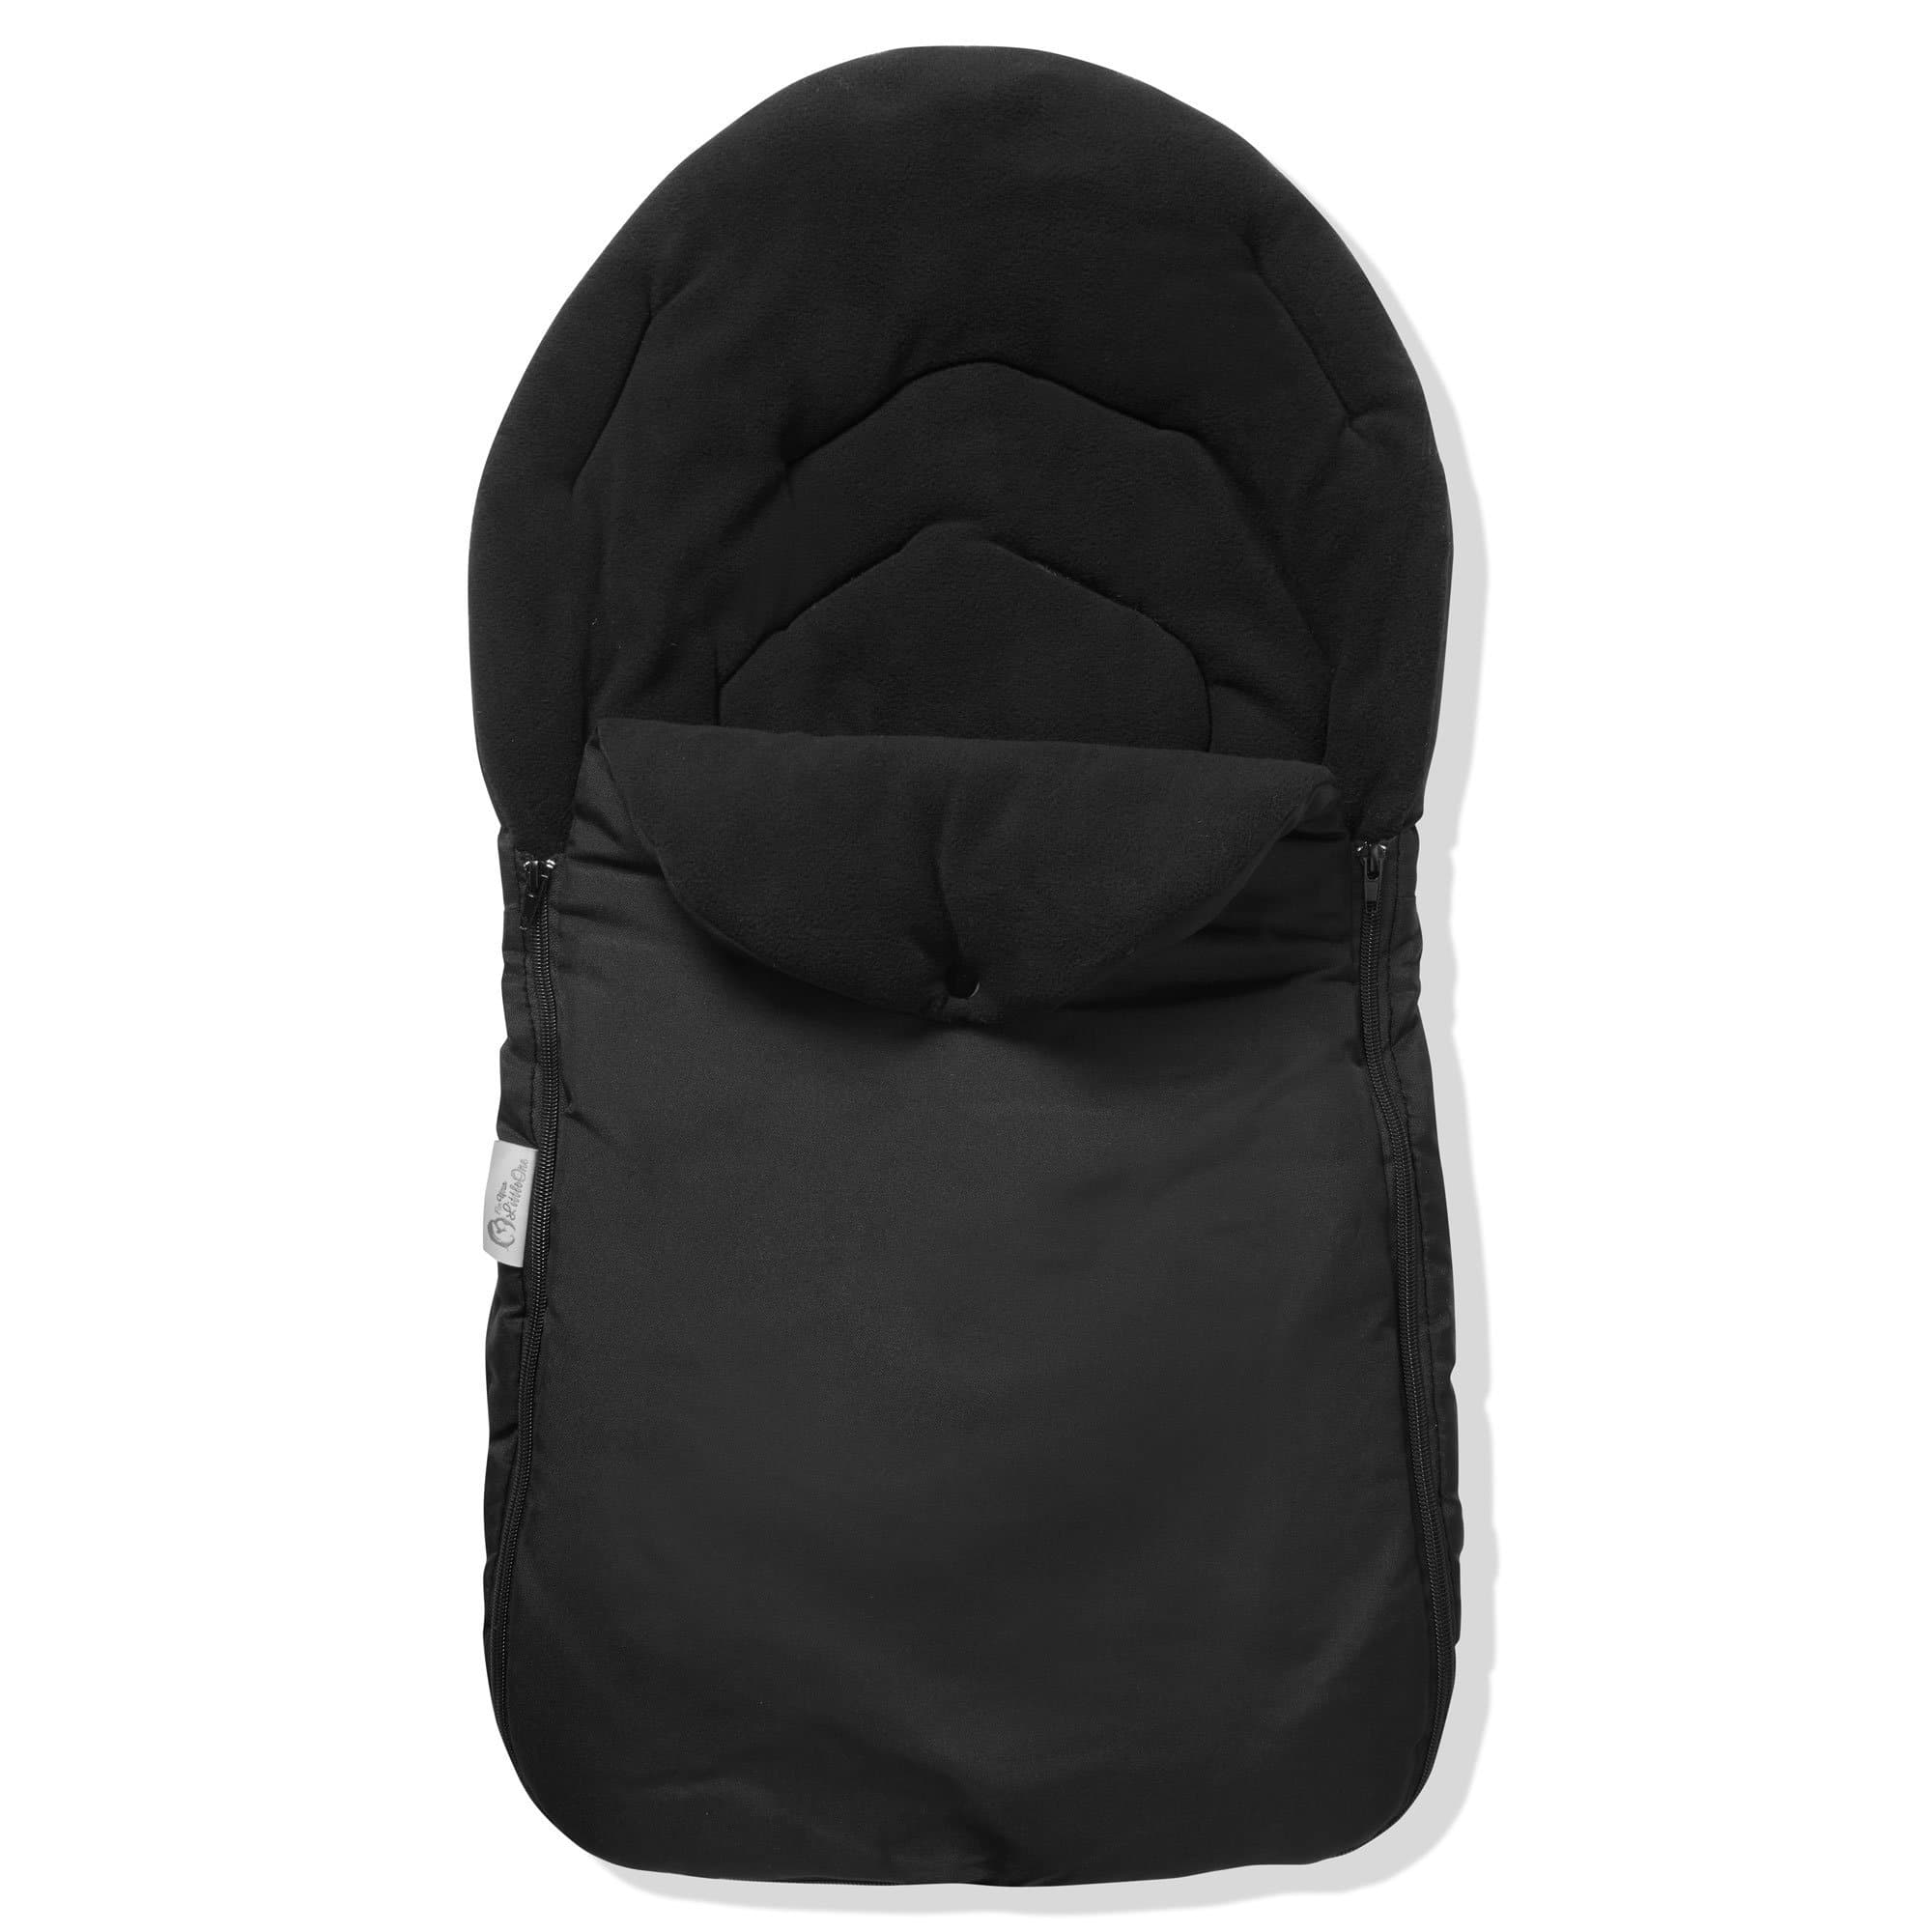 Car Seat Footmuff / Cosy Toes Compatible with Babylo - Black / Fits All Models | For Your Little One